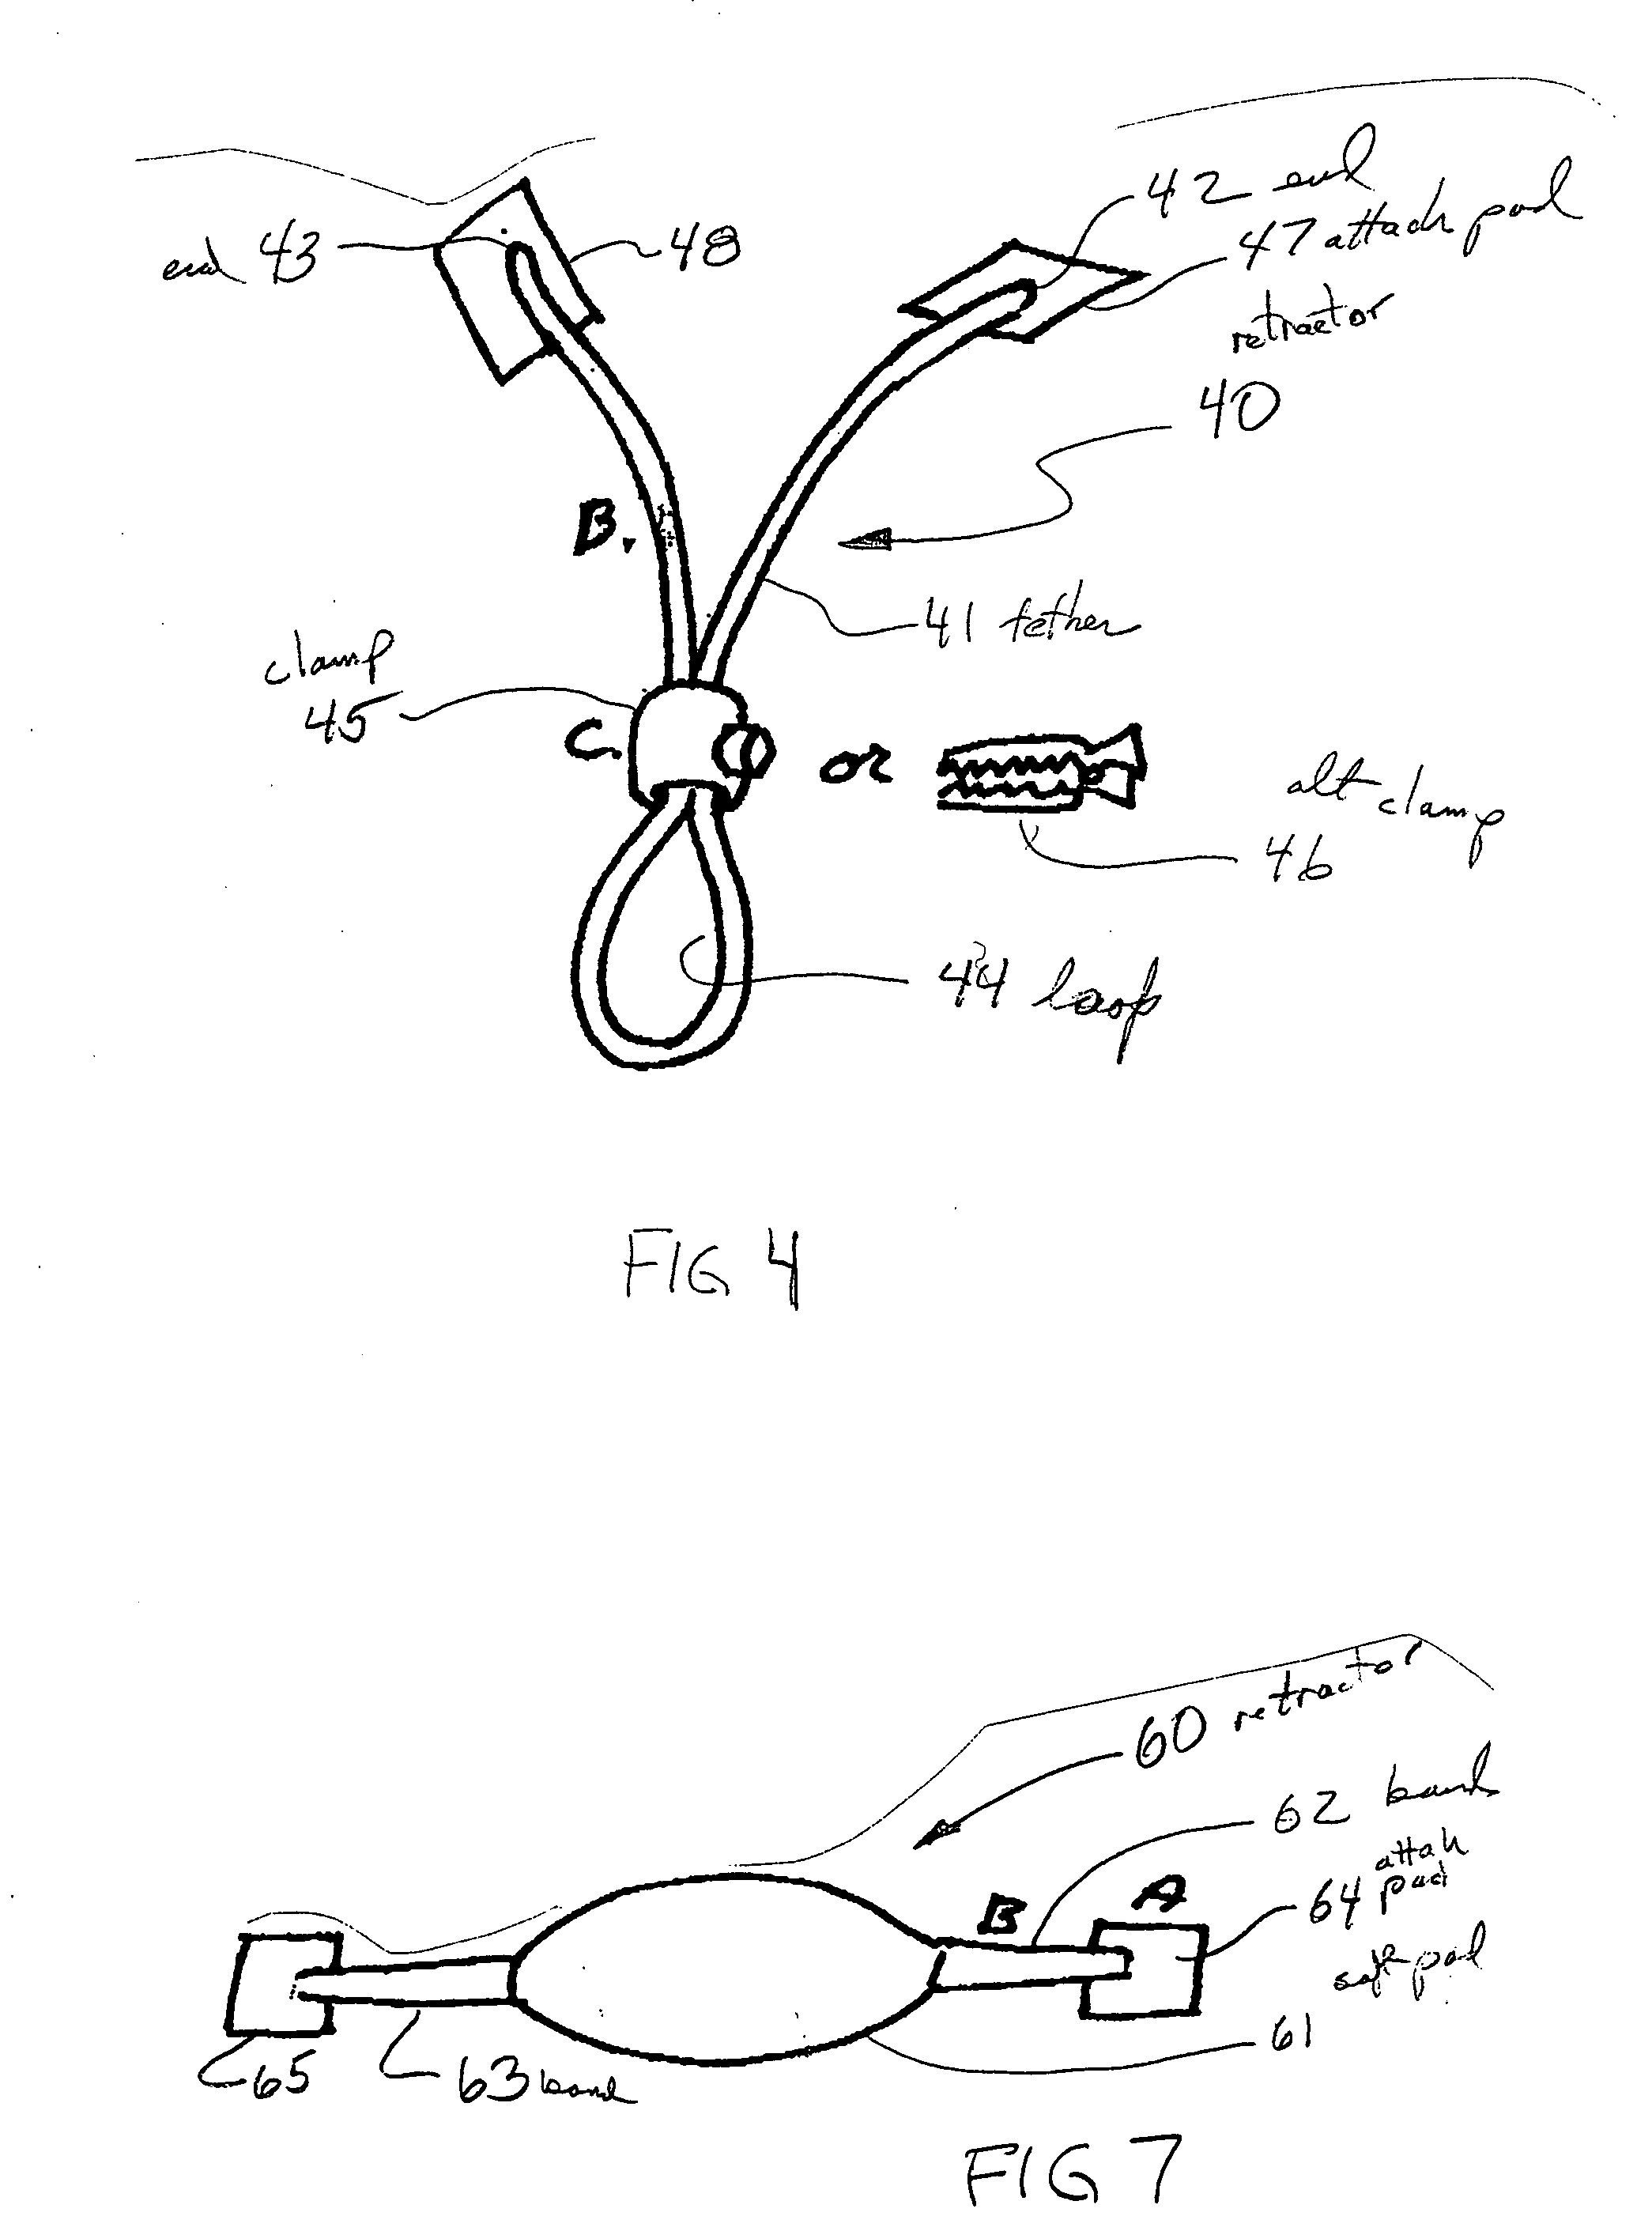 Penis retractor for use in surgical or other medical procedures